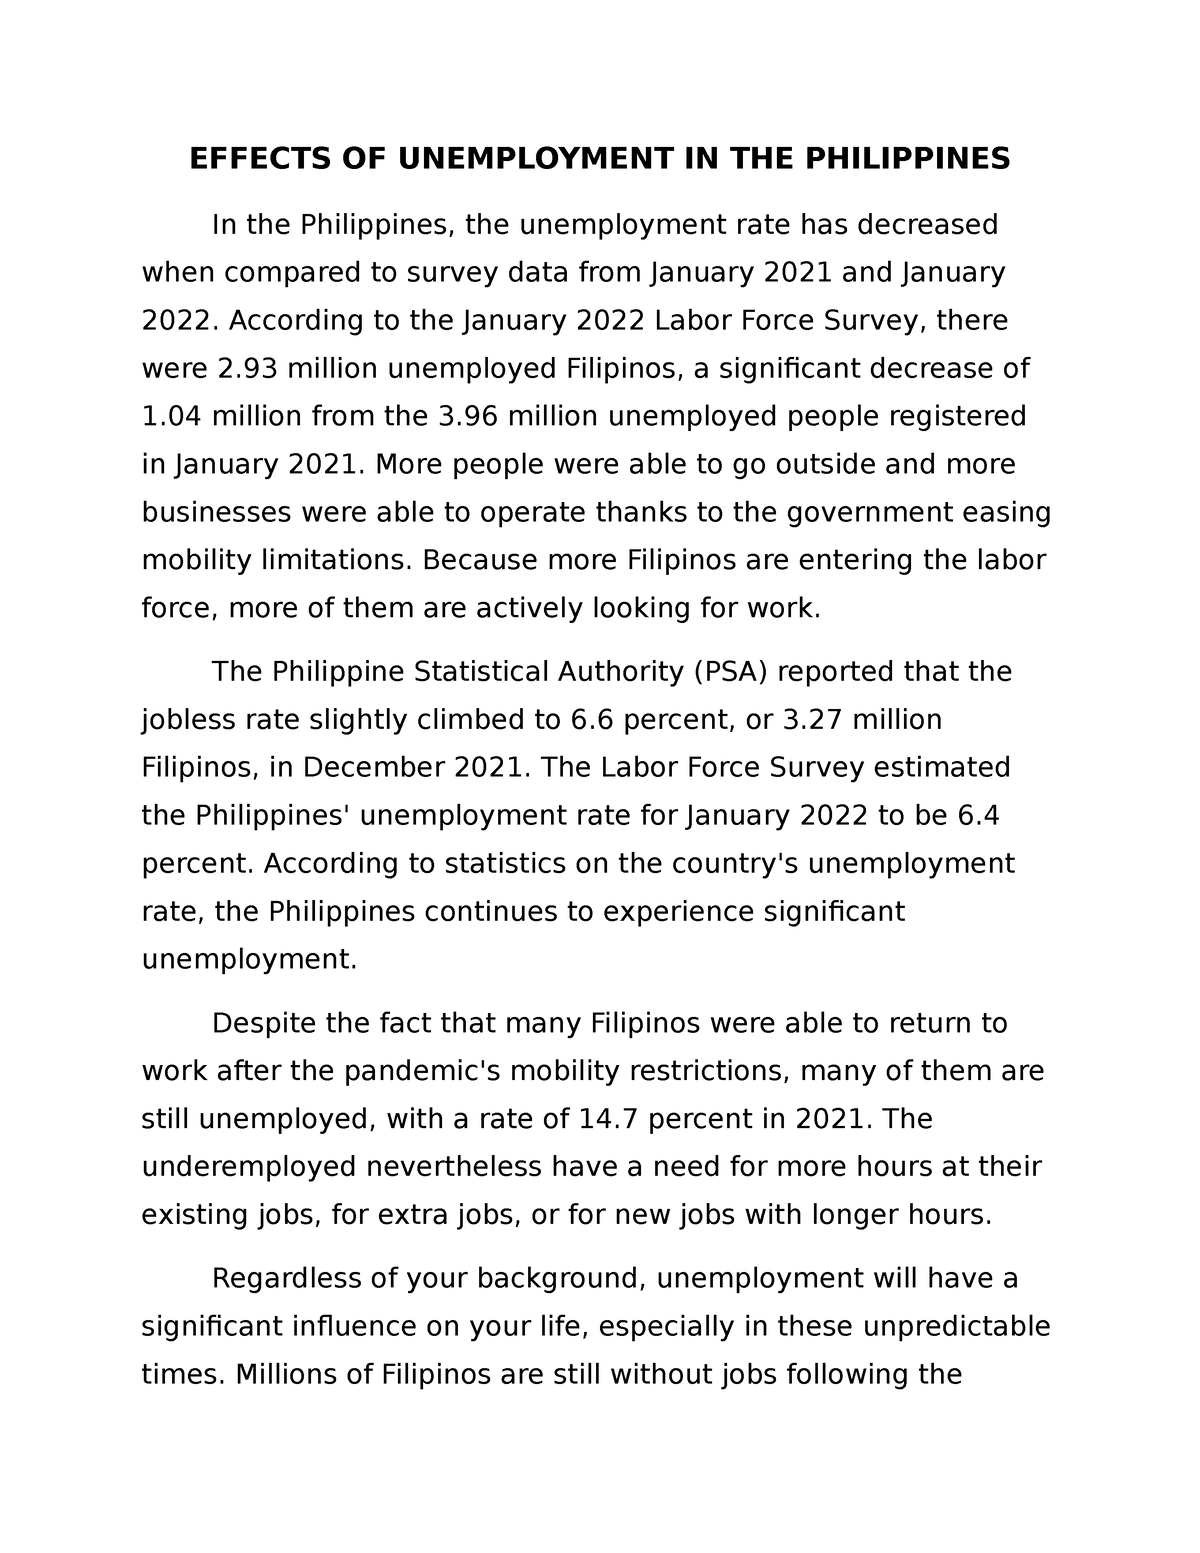 short essay on unemployment in the philippines